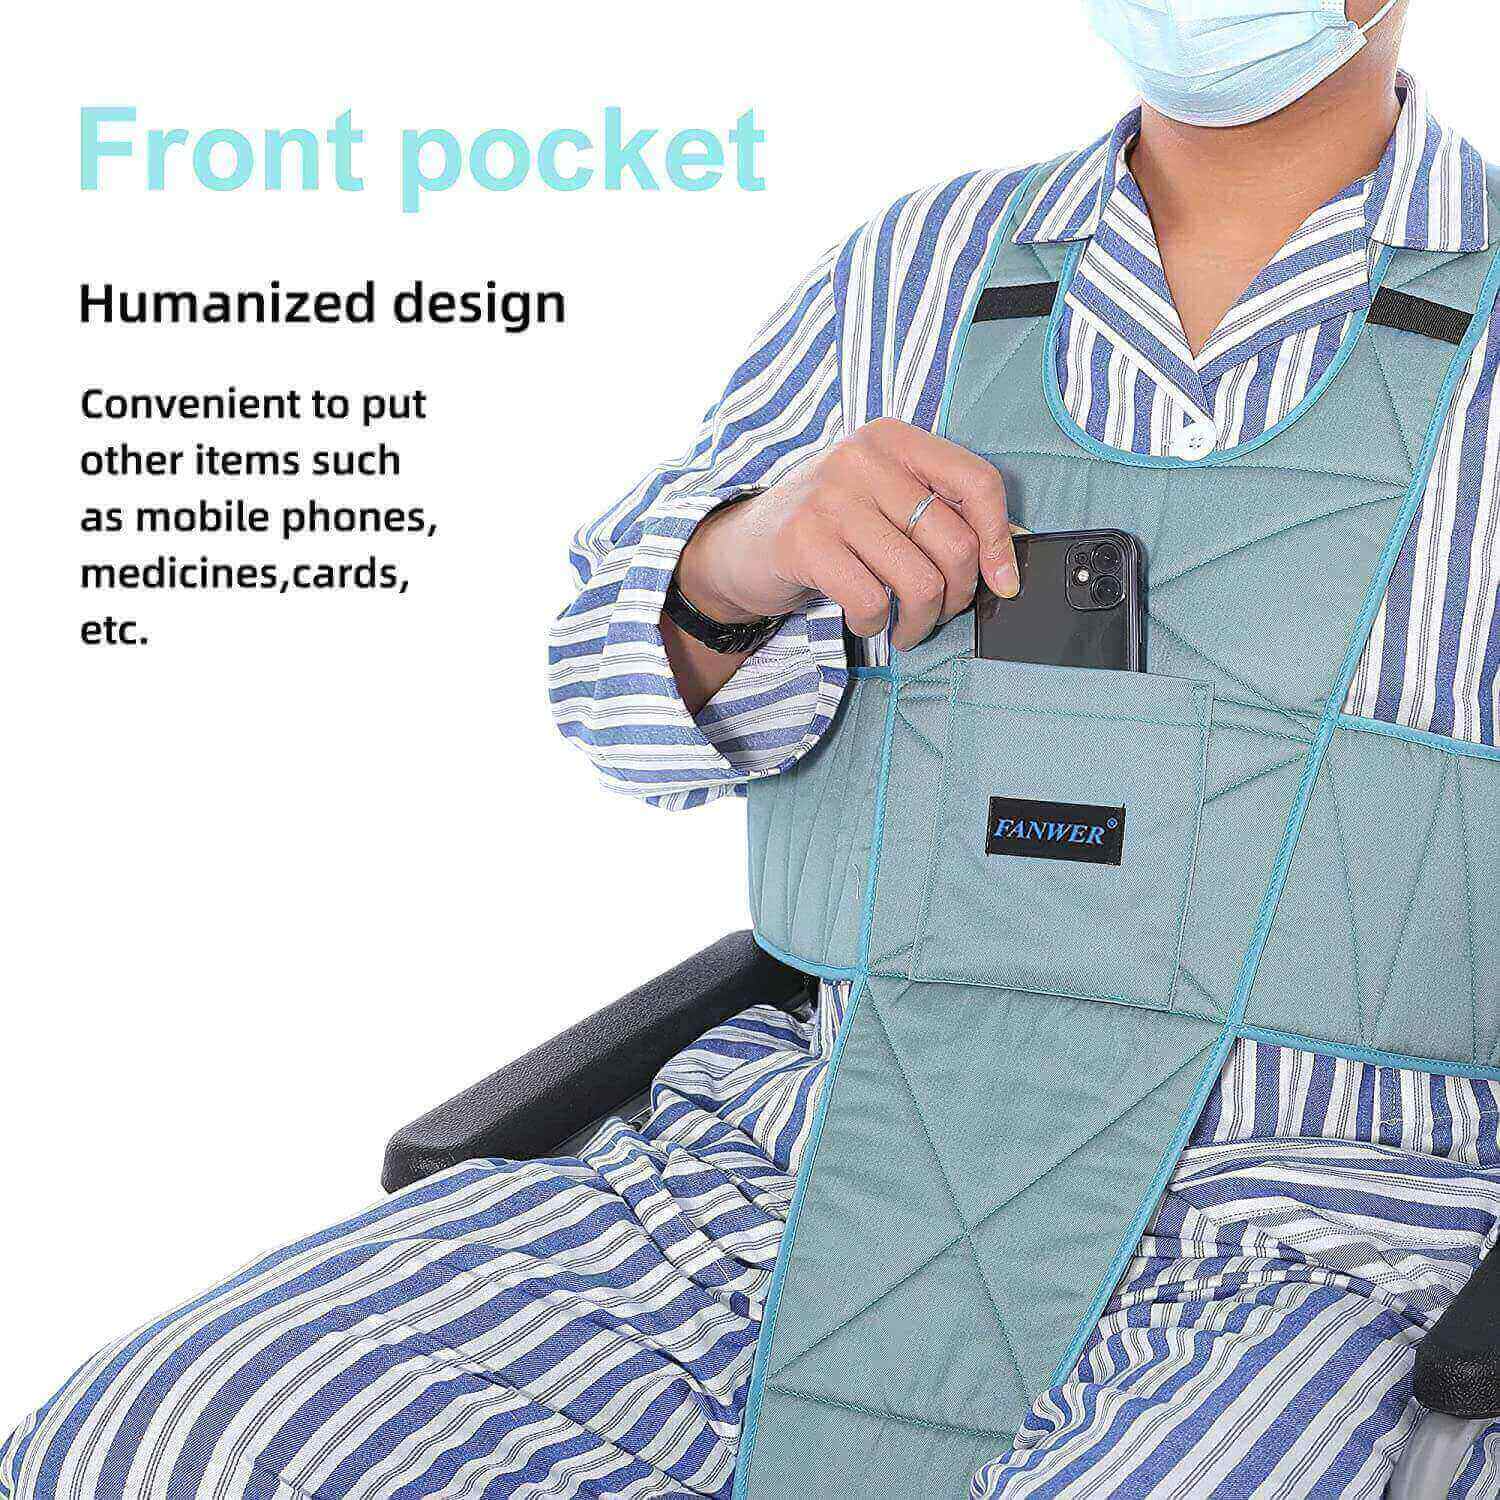 Fanwer Wheelchair Harness for Transfer Aids, the picket facet